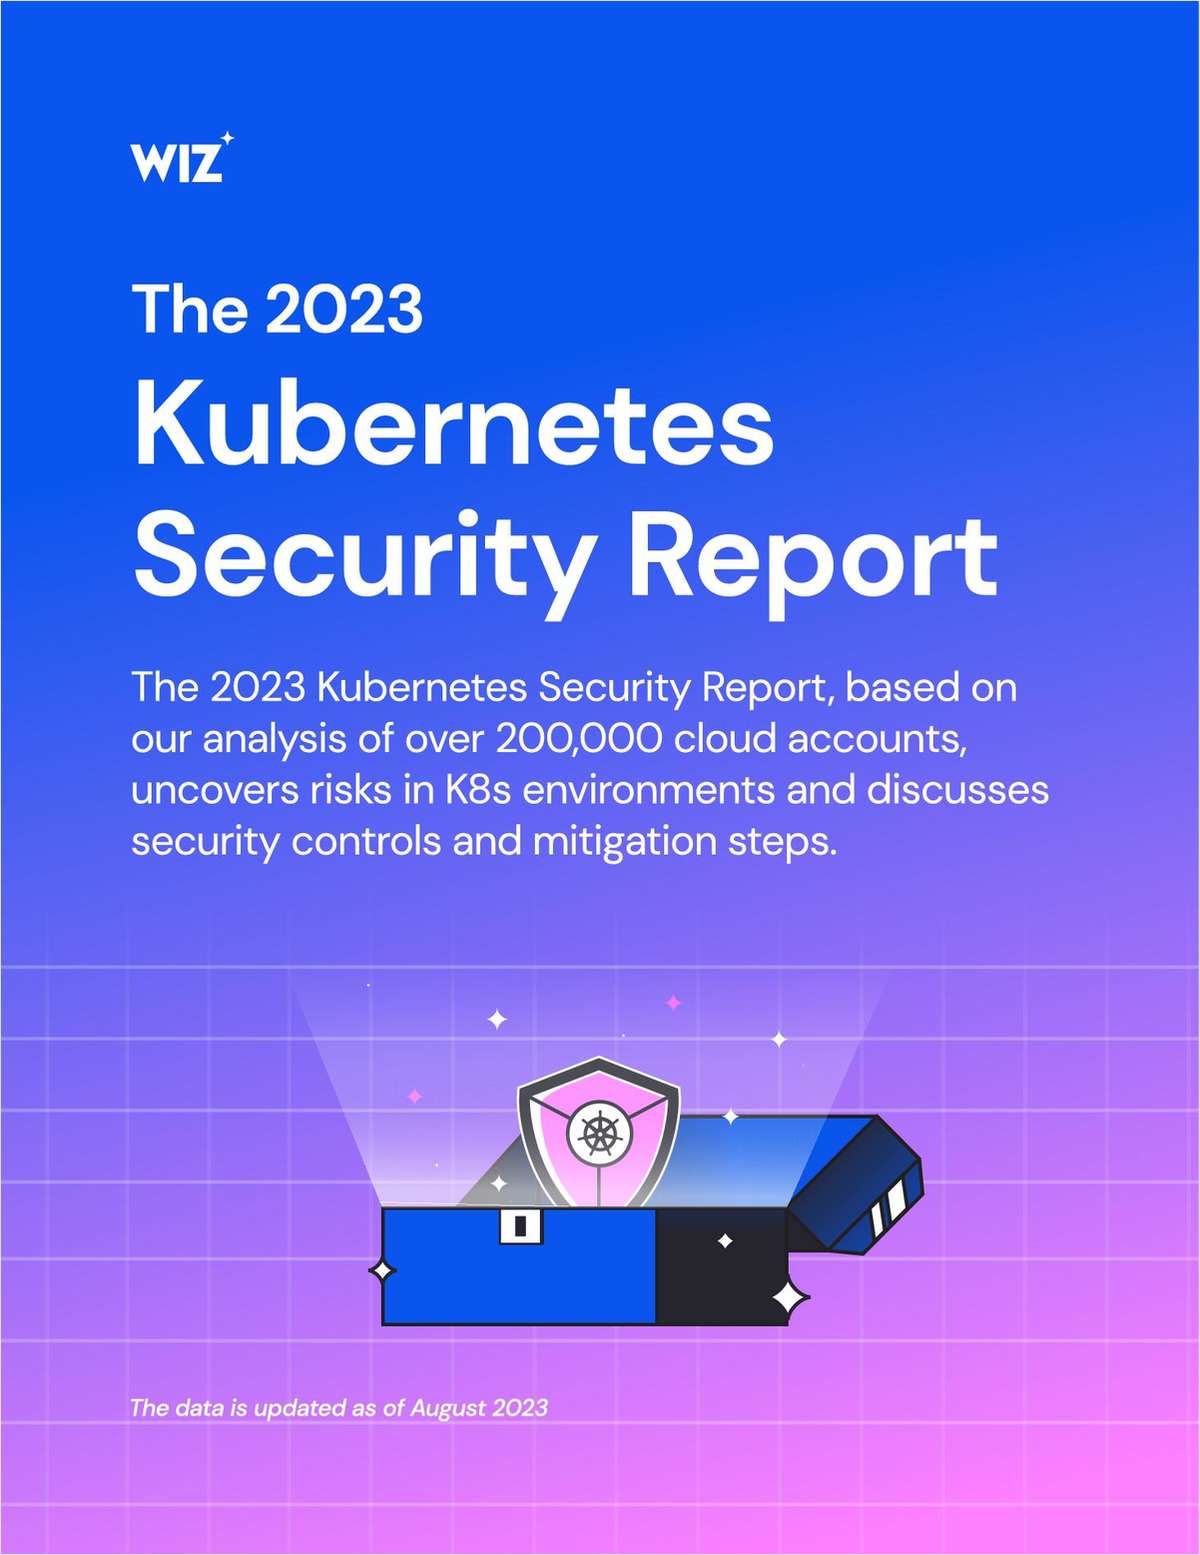 The 2023 Kubernetes Security Report